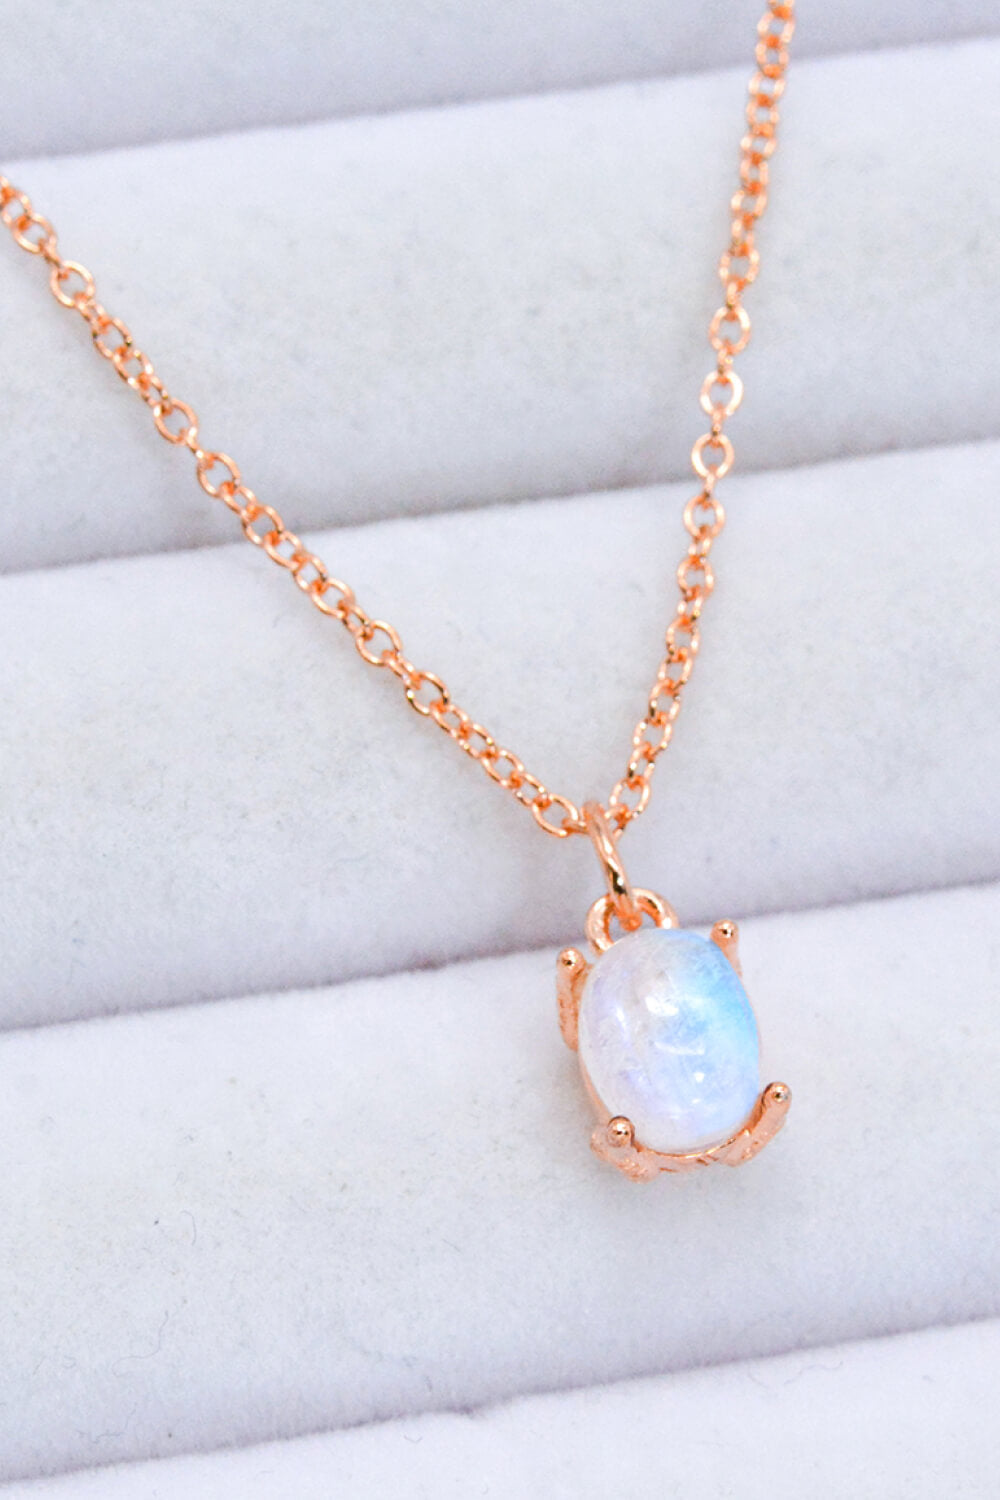 Natural 4-Prong Pendant Moonstone Necklace - Necklaces - FITGGINS